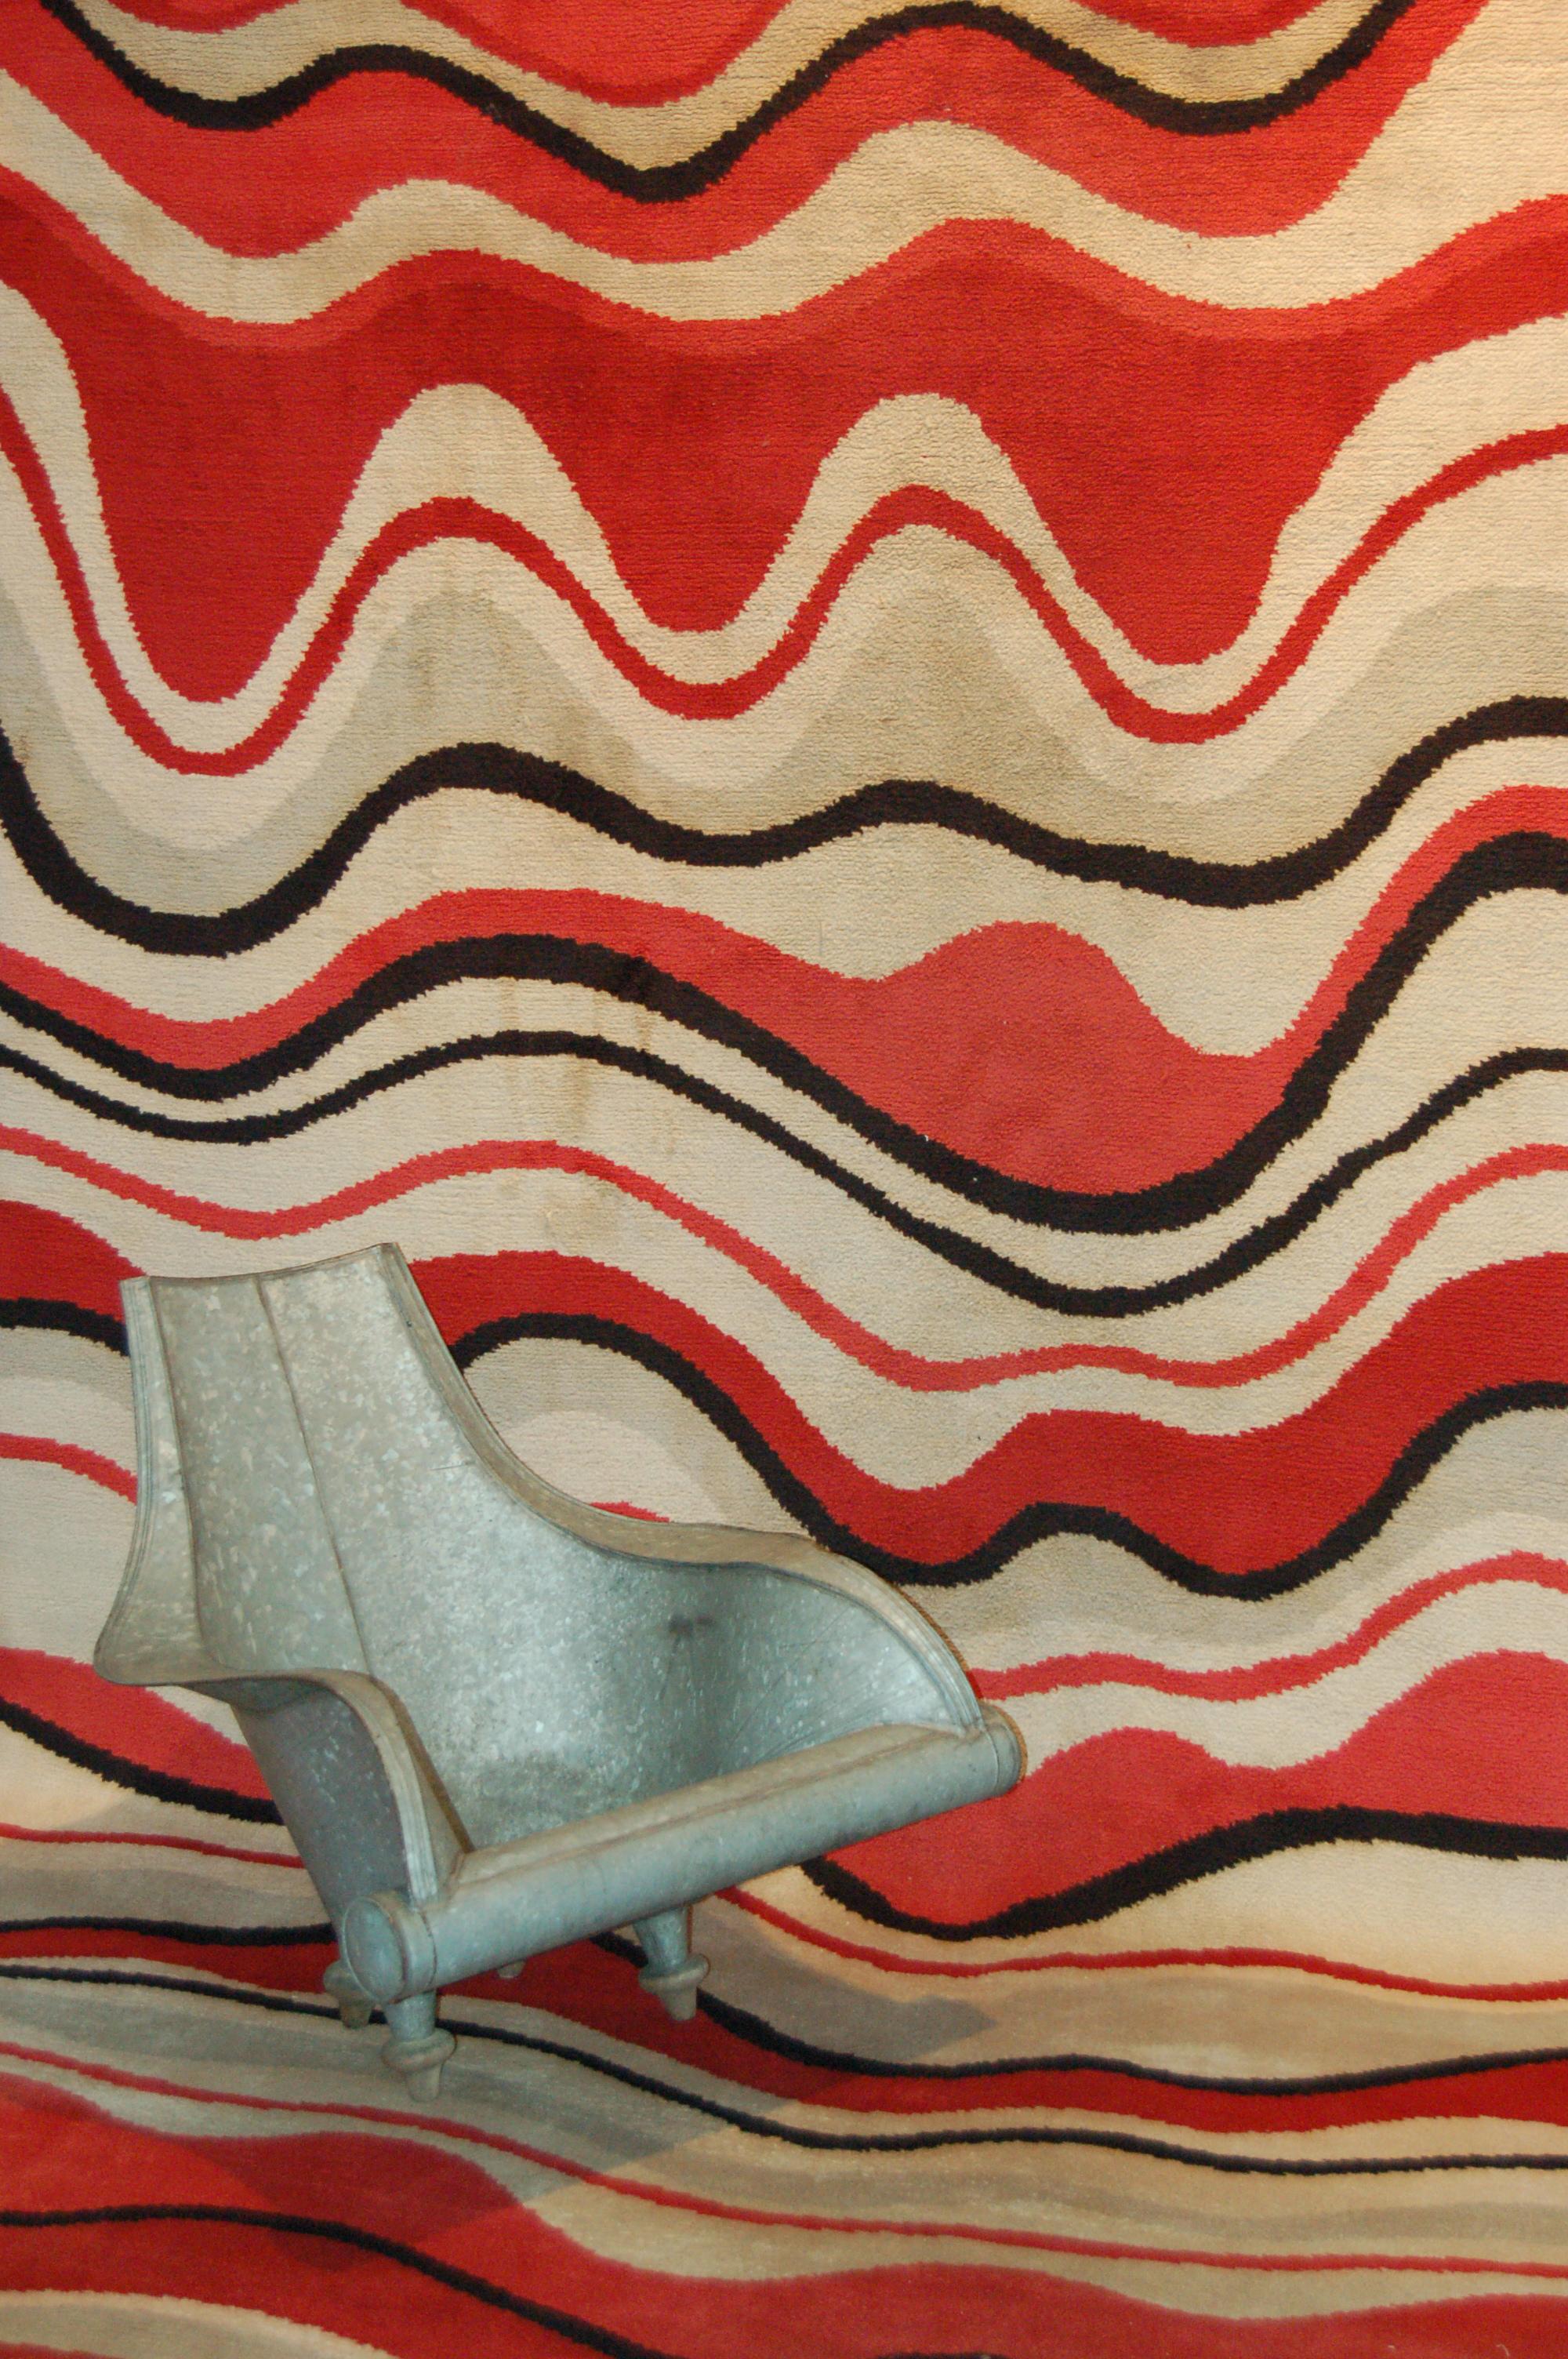 A stunning modernist carpet with an allover pattern composed of irregular waves in various shades of red, light grey and black on an ivory background. The 1950s were a very creative period for France, both in fashion as well as in design, the two